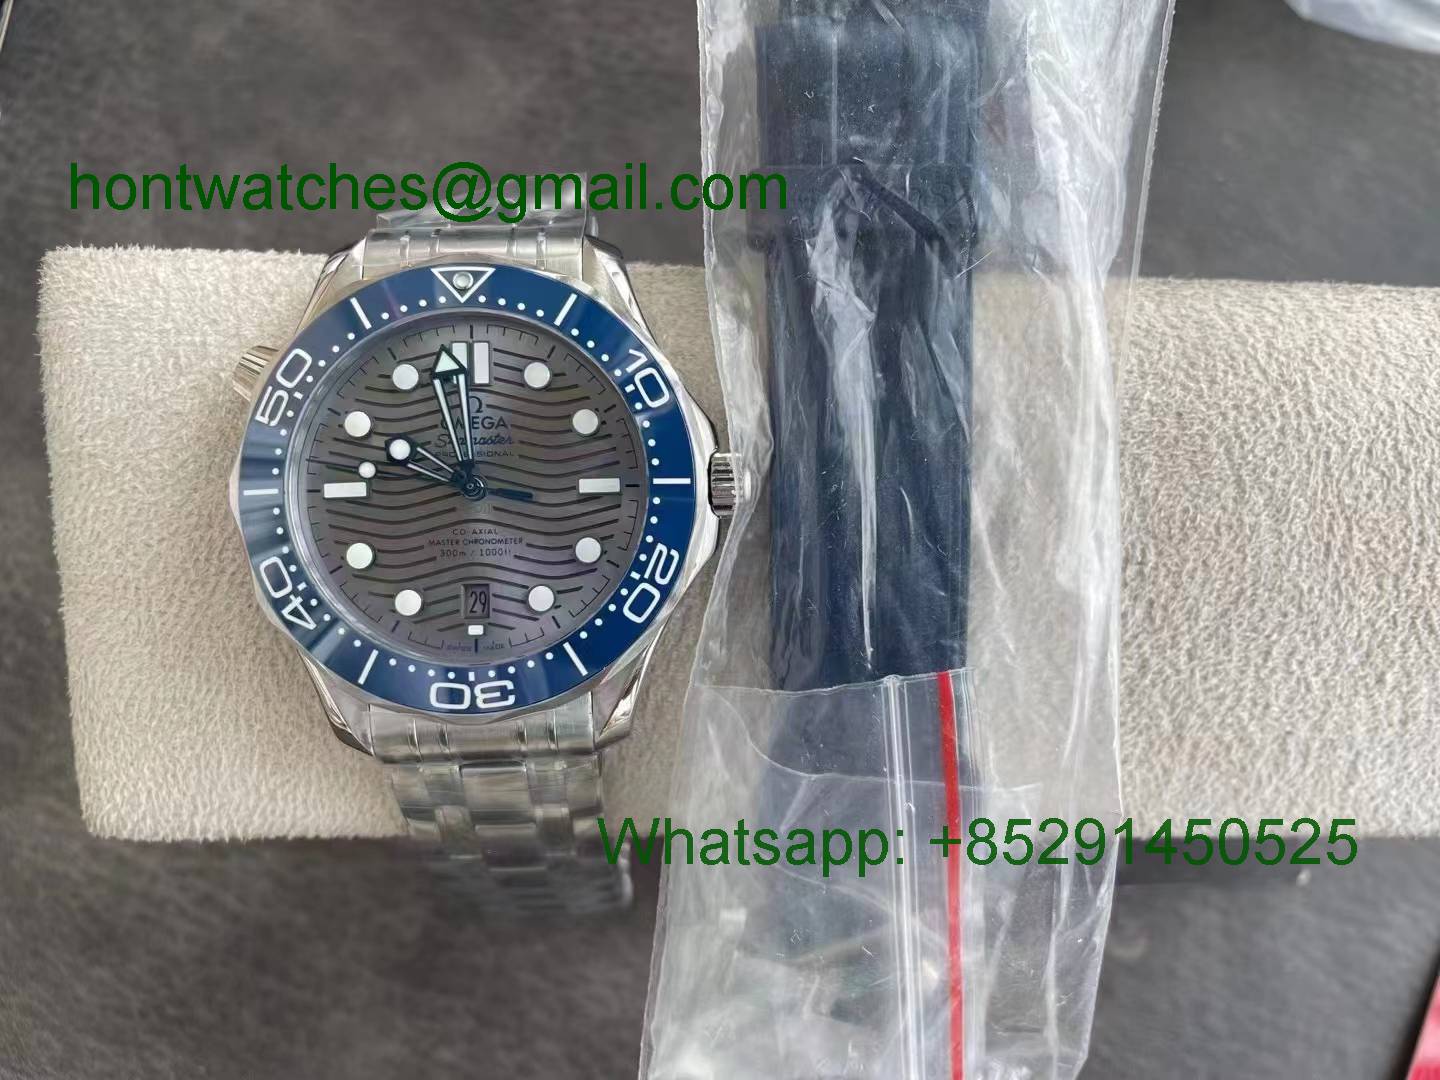 Replica OMEGA Seamaster Diver 300M VSF 1:1 Best Gray Dial V2 Hontwatch Wholesale